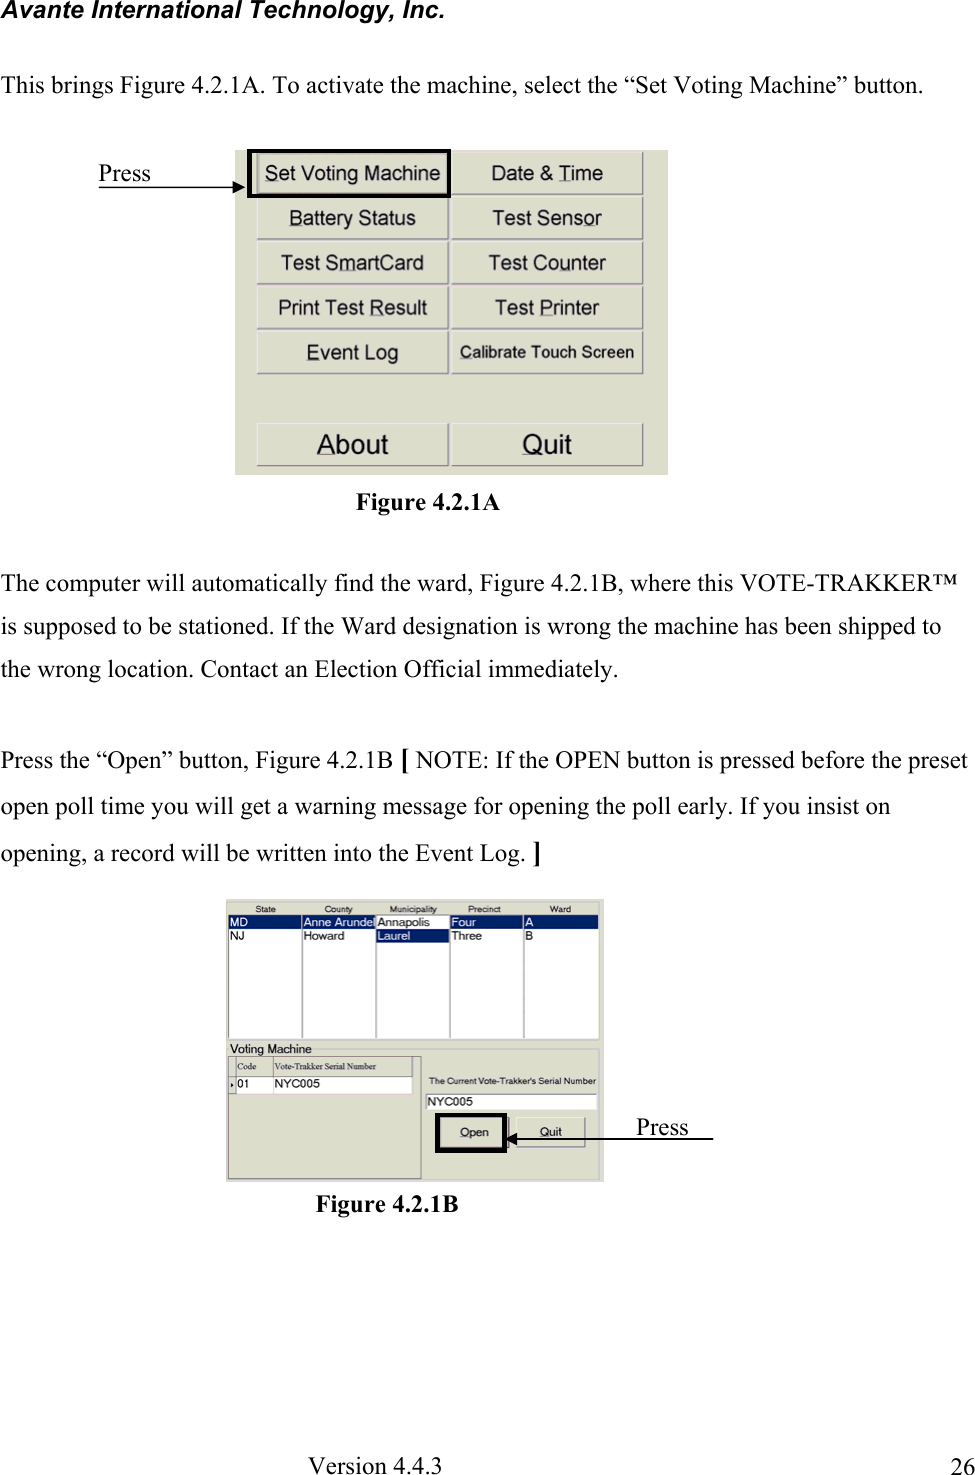 Avante International Technology, Inc.  Version 4.4.3  26This brings Figure 4.2.1A. To activate the machine, select the “Set Voting Machine” button.  The computer will automatically find the ward, Figure 4.2.1B, where this VOTE-TRAKKER™ is supposed to be stationed. If the Ward designation is wrong the machine has been shipped to the wrong location. Contact an Election Official immediately.  Press the “Open” button, Figure 4.2.1B [ NOTE: If the OPEN button is pressed before the preset open poll time you will get a warning message for opening the poll early. If you insist on opening, a record will be written into the Event Log. ]            Figure 4.2.1A Press Figure 4.2.1B Press